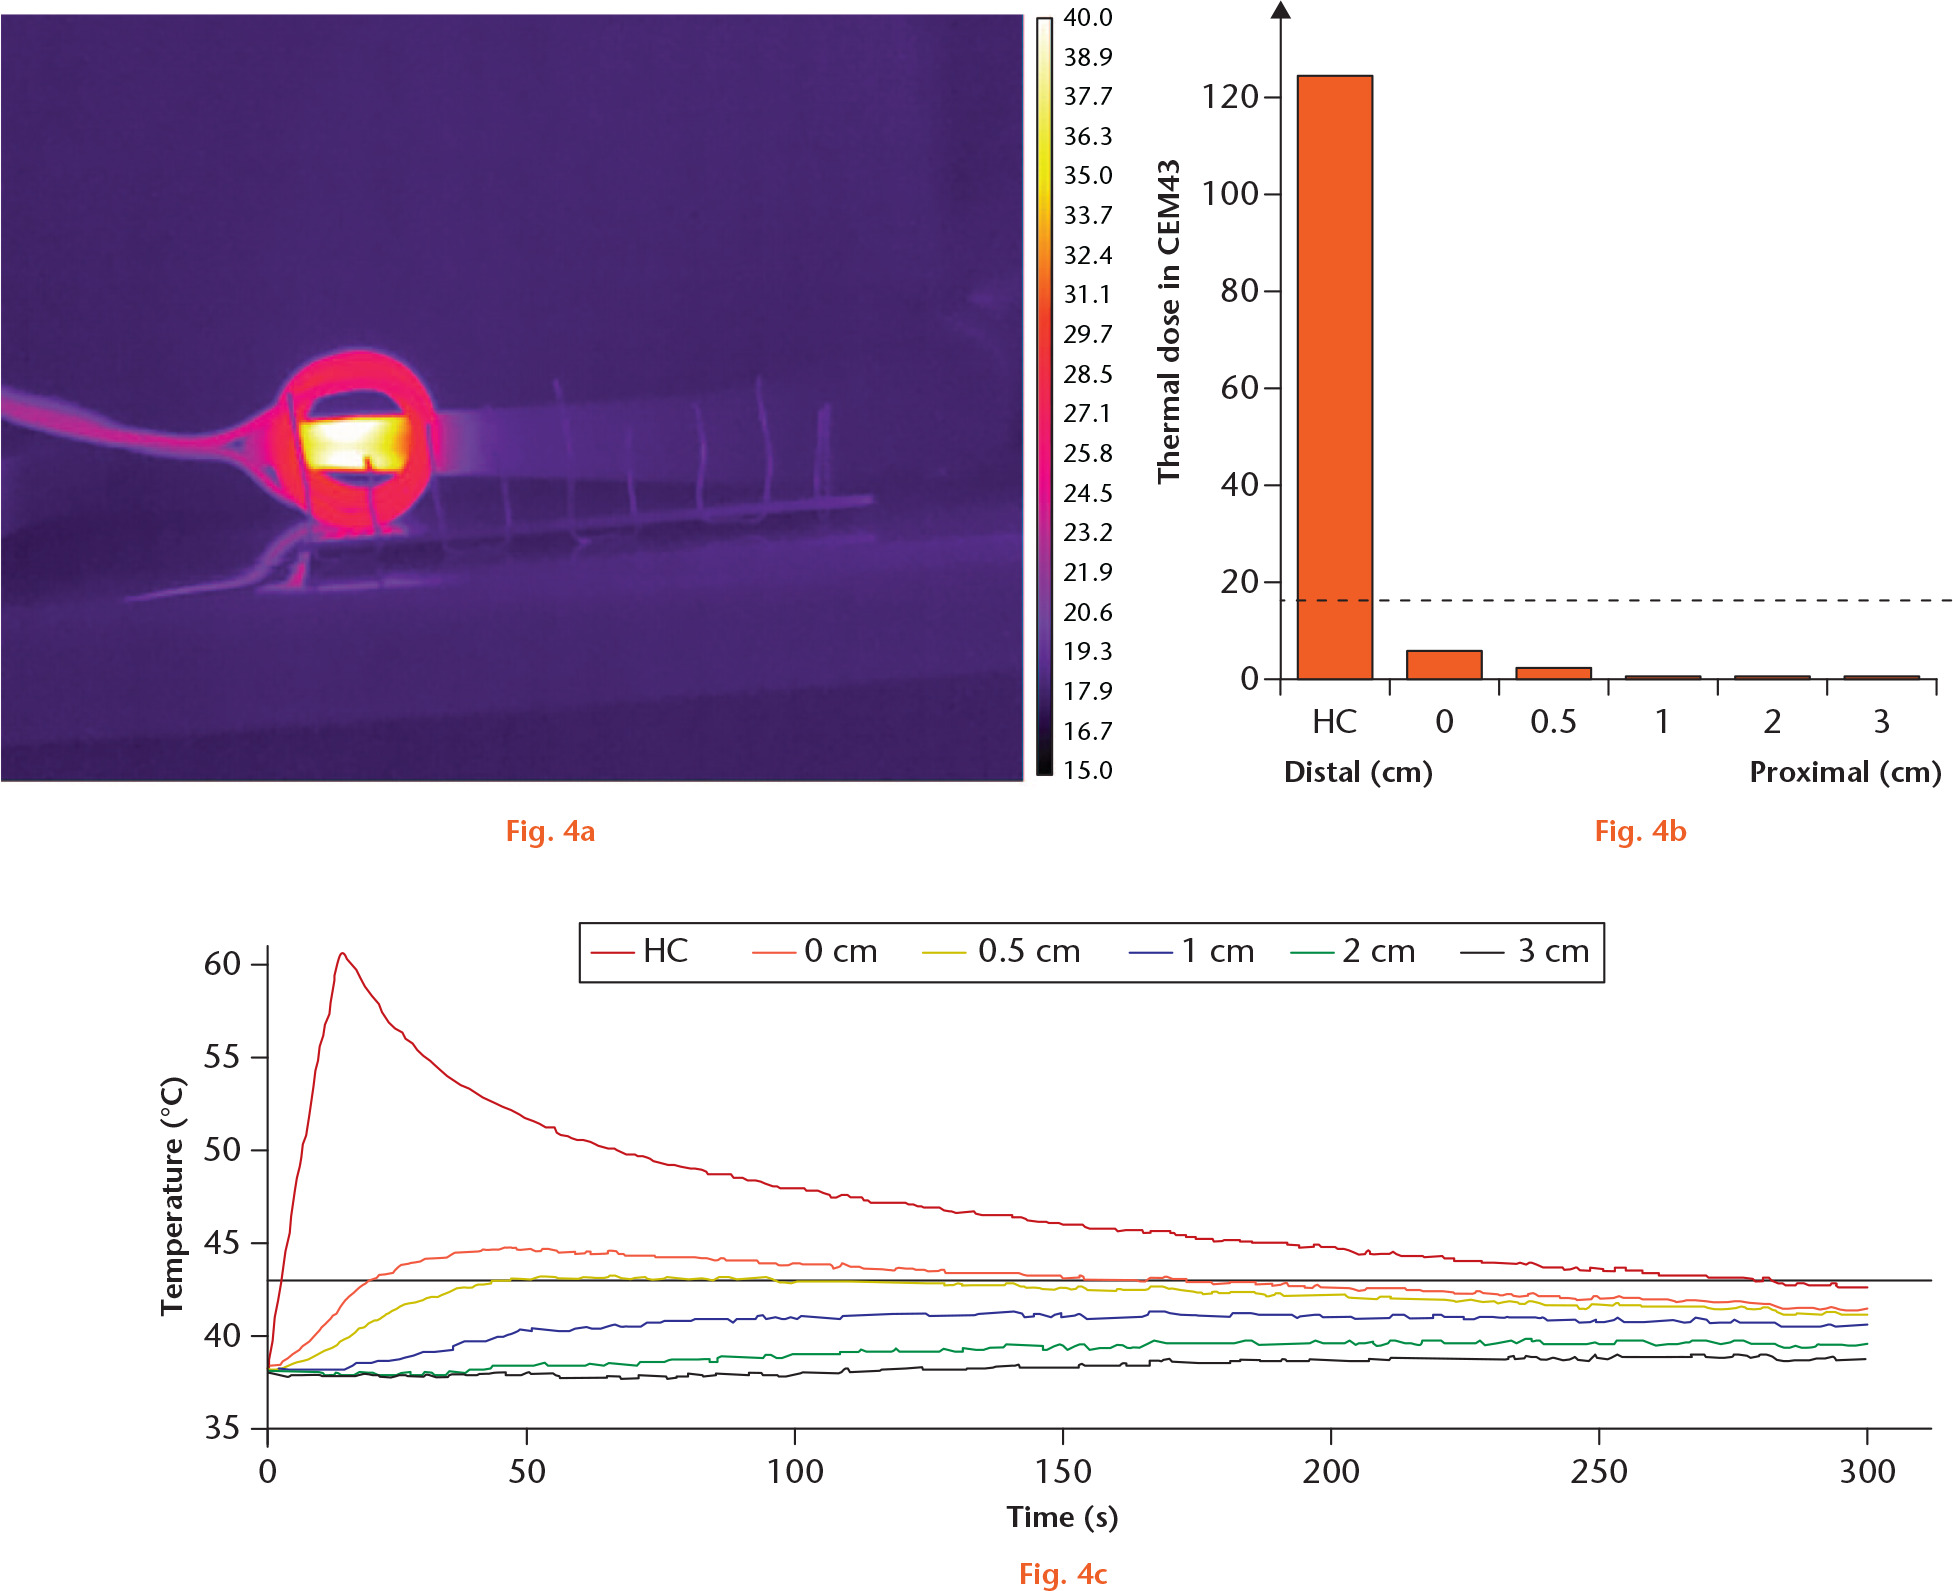  
            Segmental induction heating of hip stem, distally. a) A thermal image from a thermal camera showing selective heating. The vertical lines have 1 cm spacing. b) A graph showing thermal dose in CEM43 at several distances from the heating centre (HC). The dashed line represents 16 CEM43, the threshold for necrosis of bone. c) A graph showing the temperature at several distances from the HC during the segmental induction heating and thereafter.
          